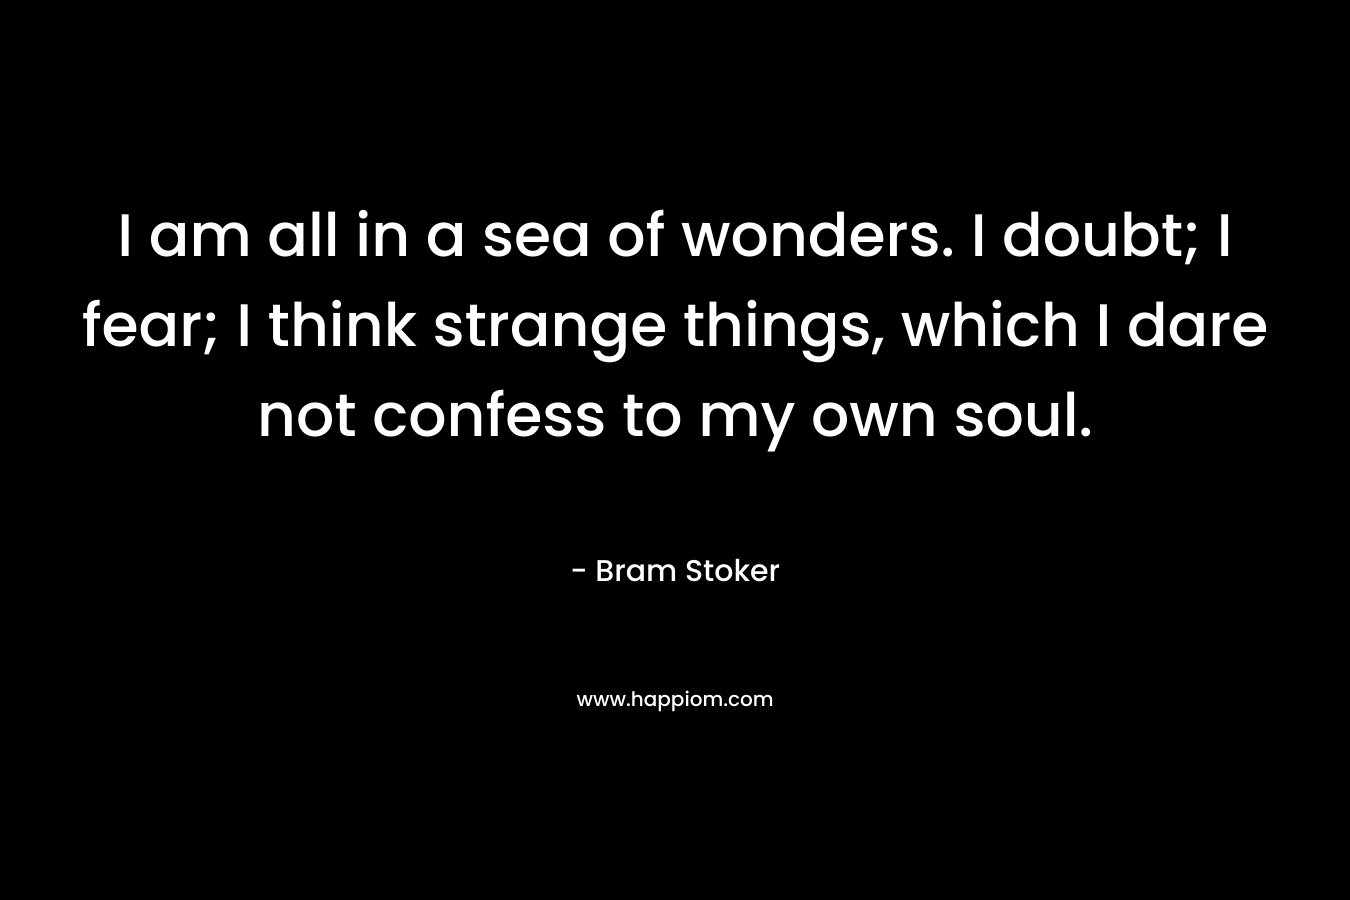 I am all in a sea of wonders. I doubt; I fear; I think strange things, which I dare not confess to my own soul.